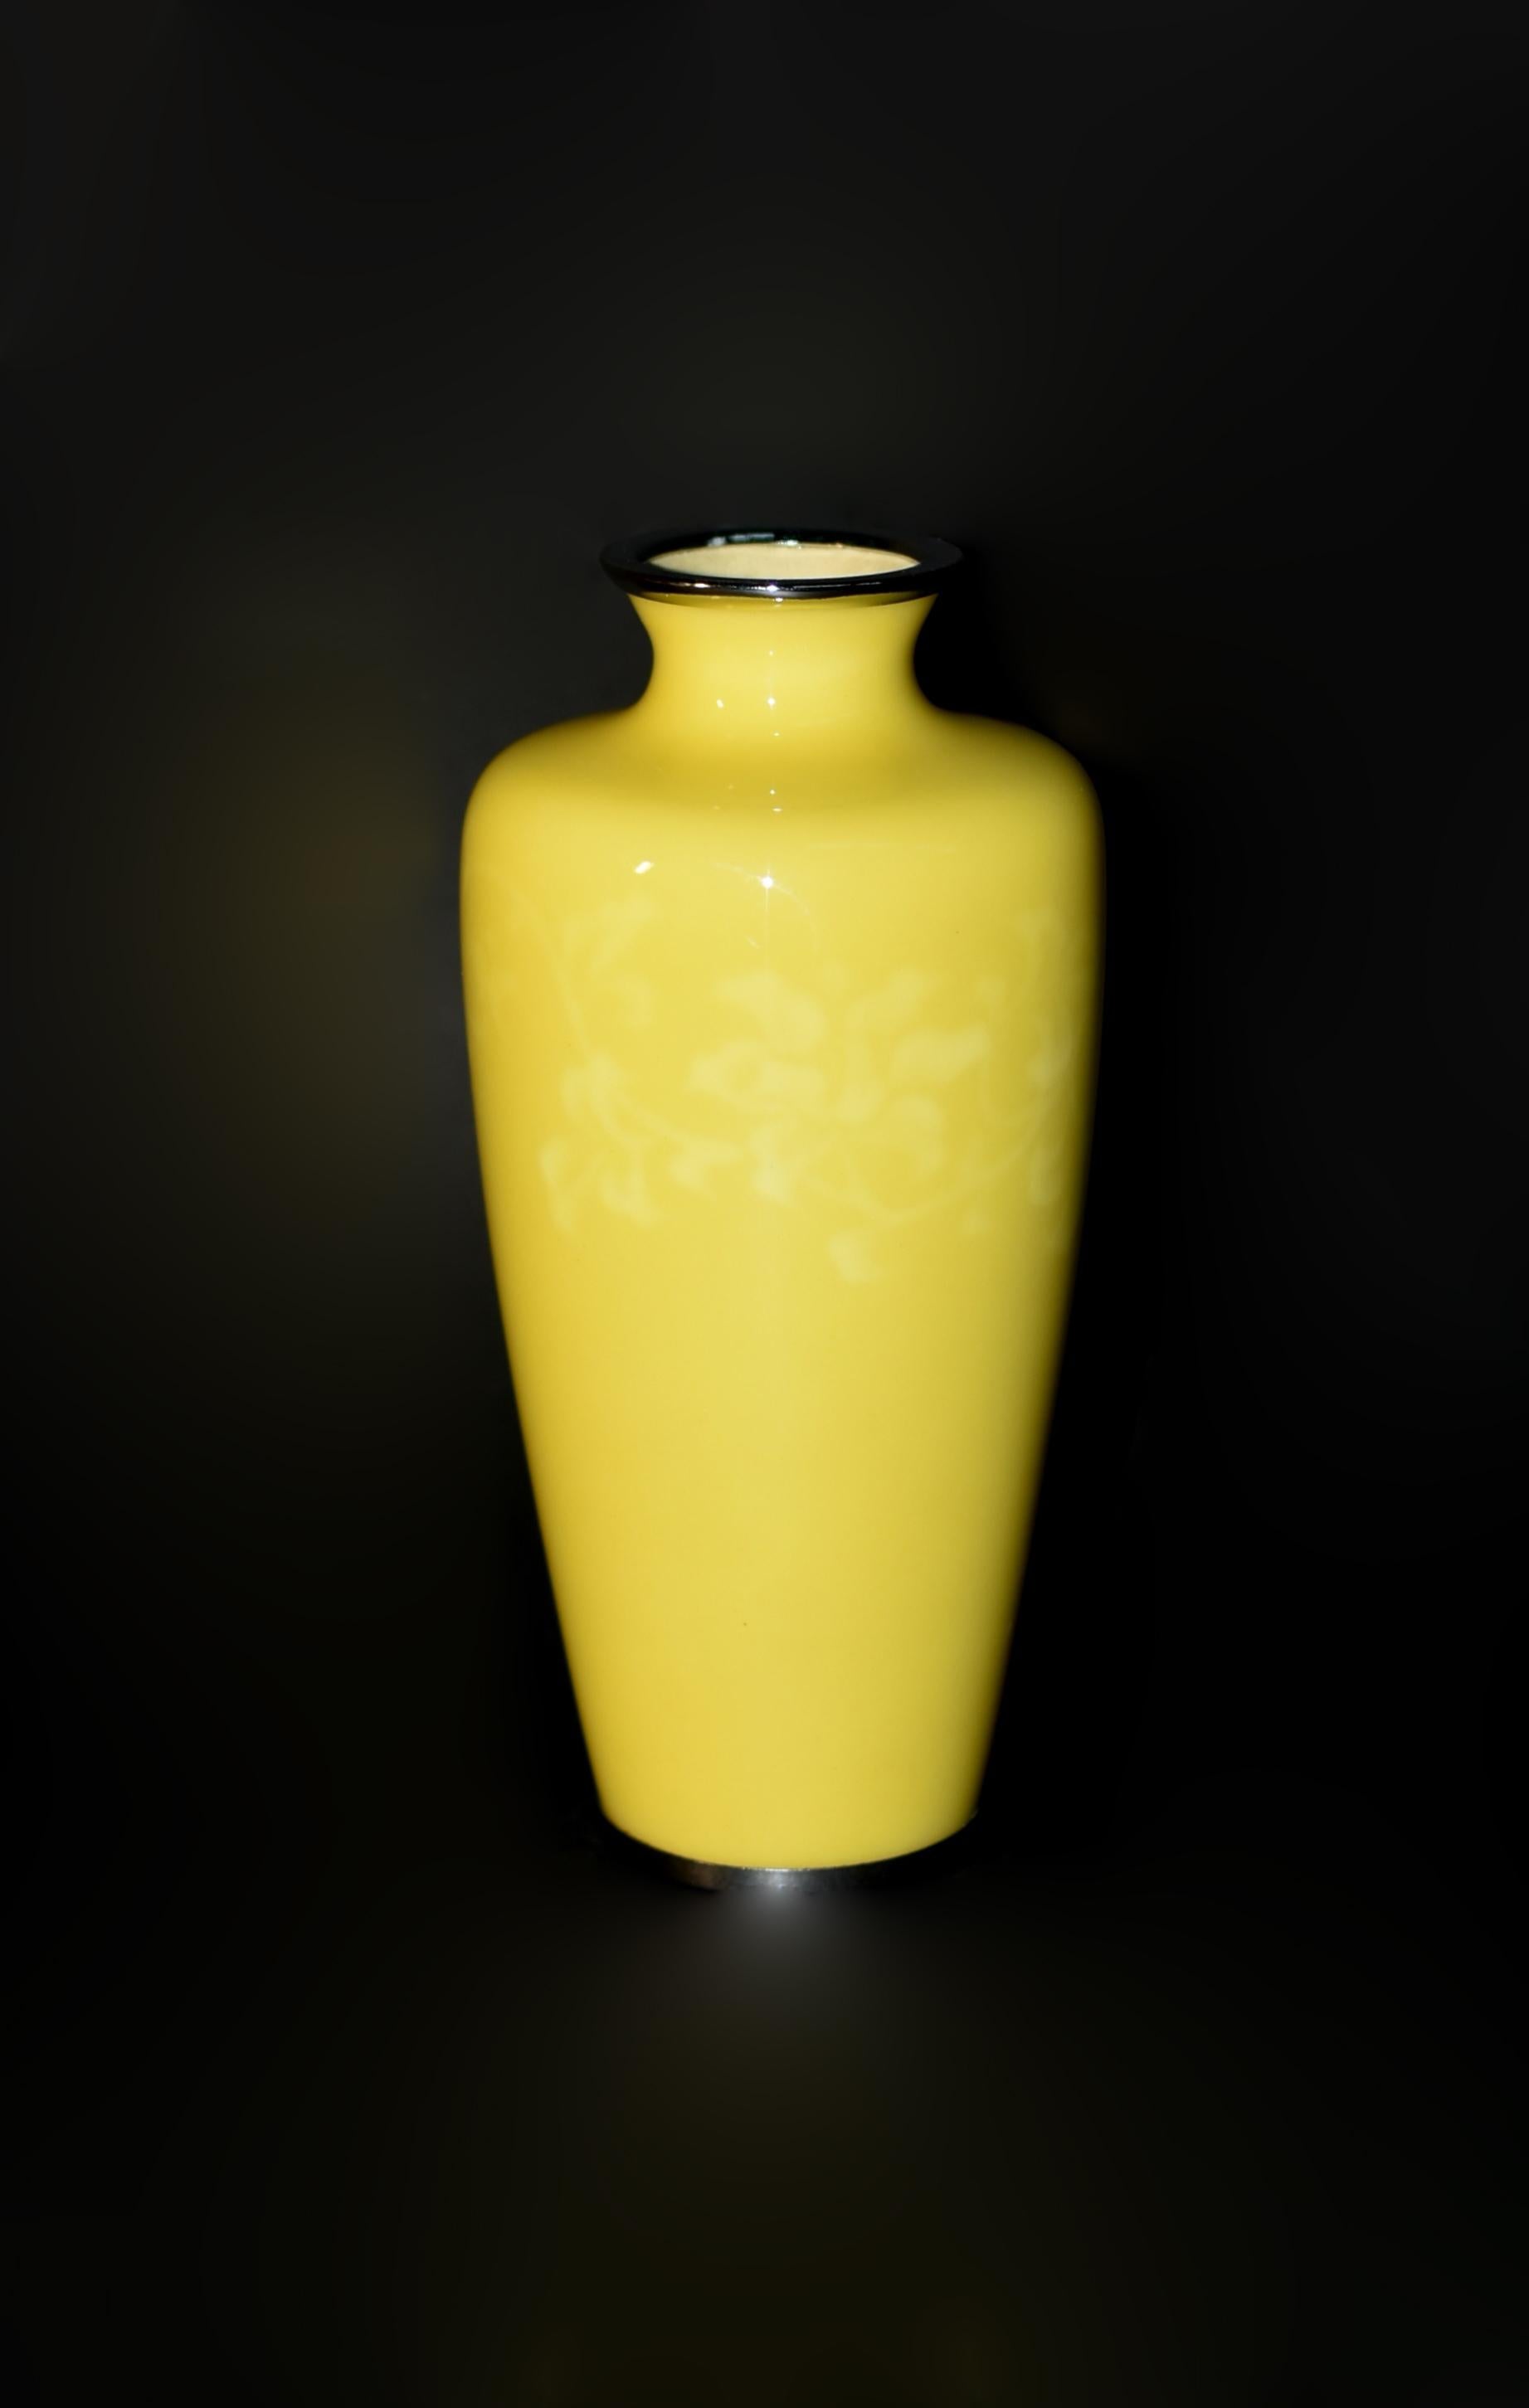 Behold the remarkable beauty of a rare Ando Jubei wireless cloisonné vase. This masterpiece, adorned in a extraordinary canary yellow enamel, portrays an intricate arabesque design under the glaze. By removing wires that would otherwise hold the